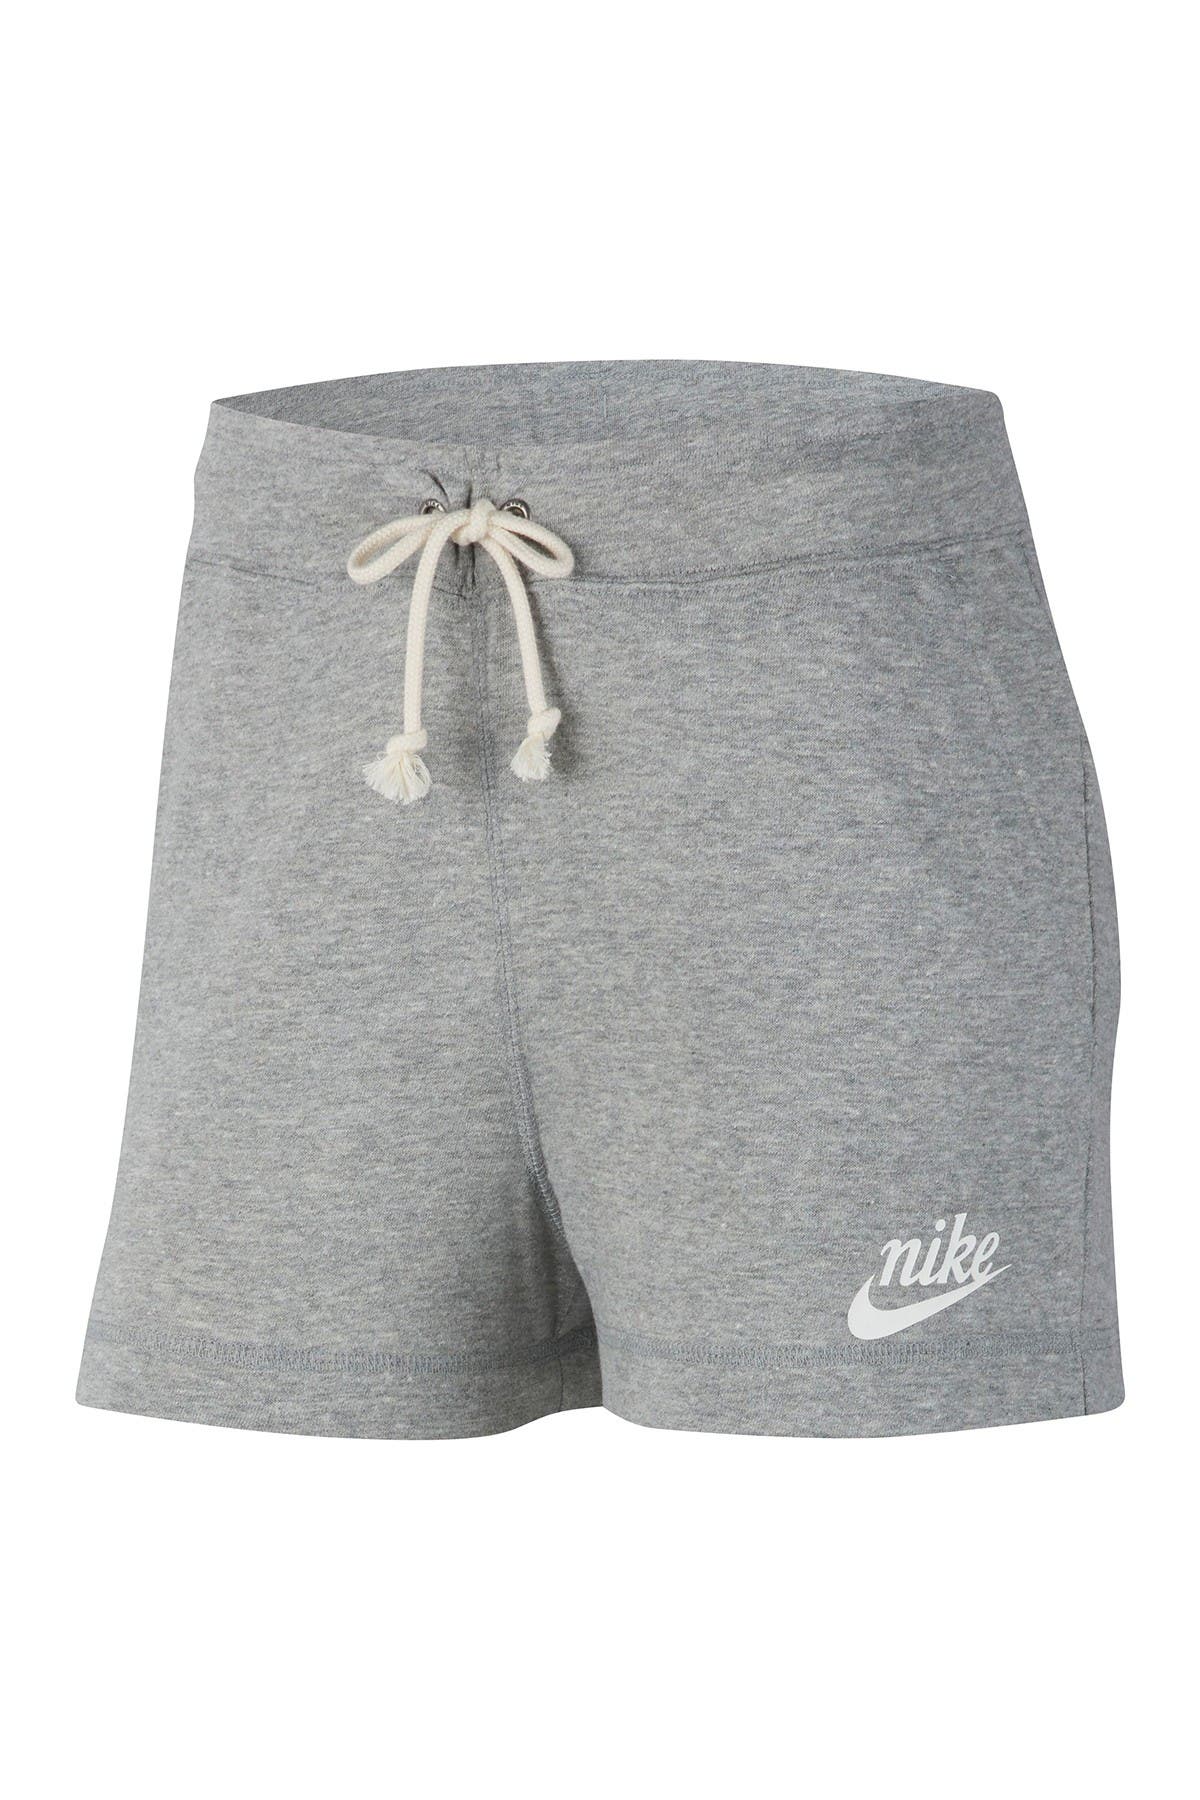 grey nike tube top and shorts set,Save up to 16%,www.ilcascinone.com